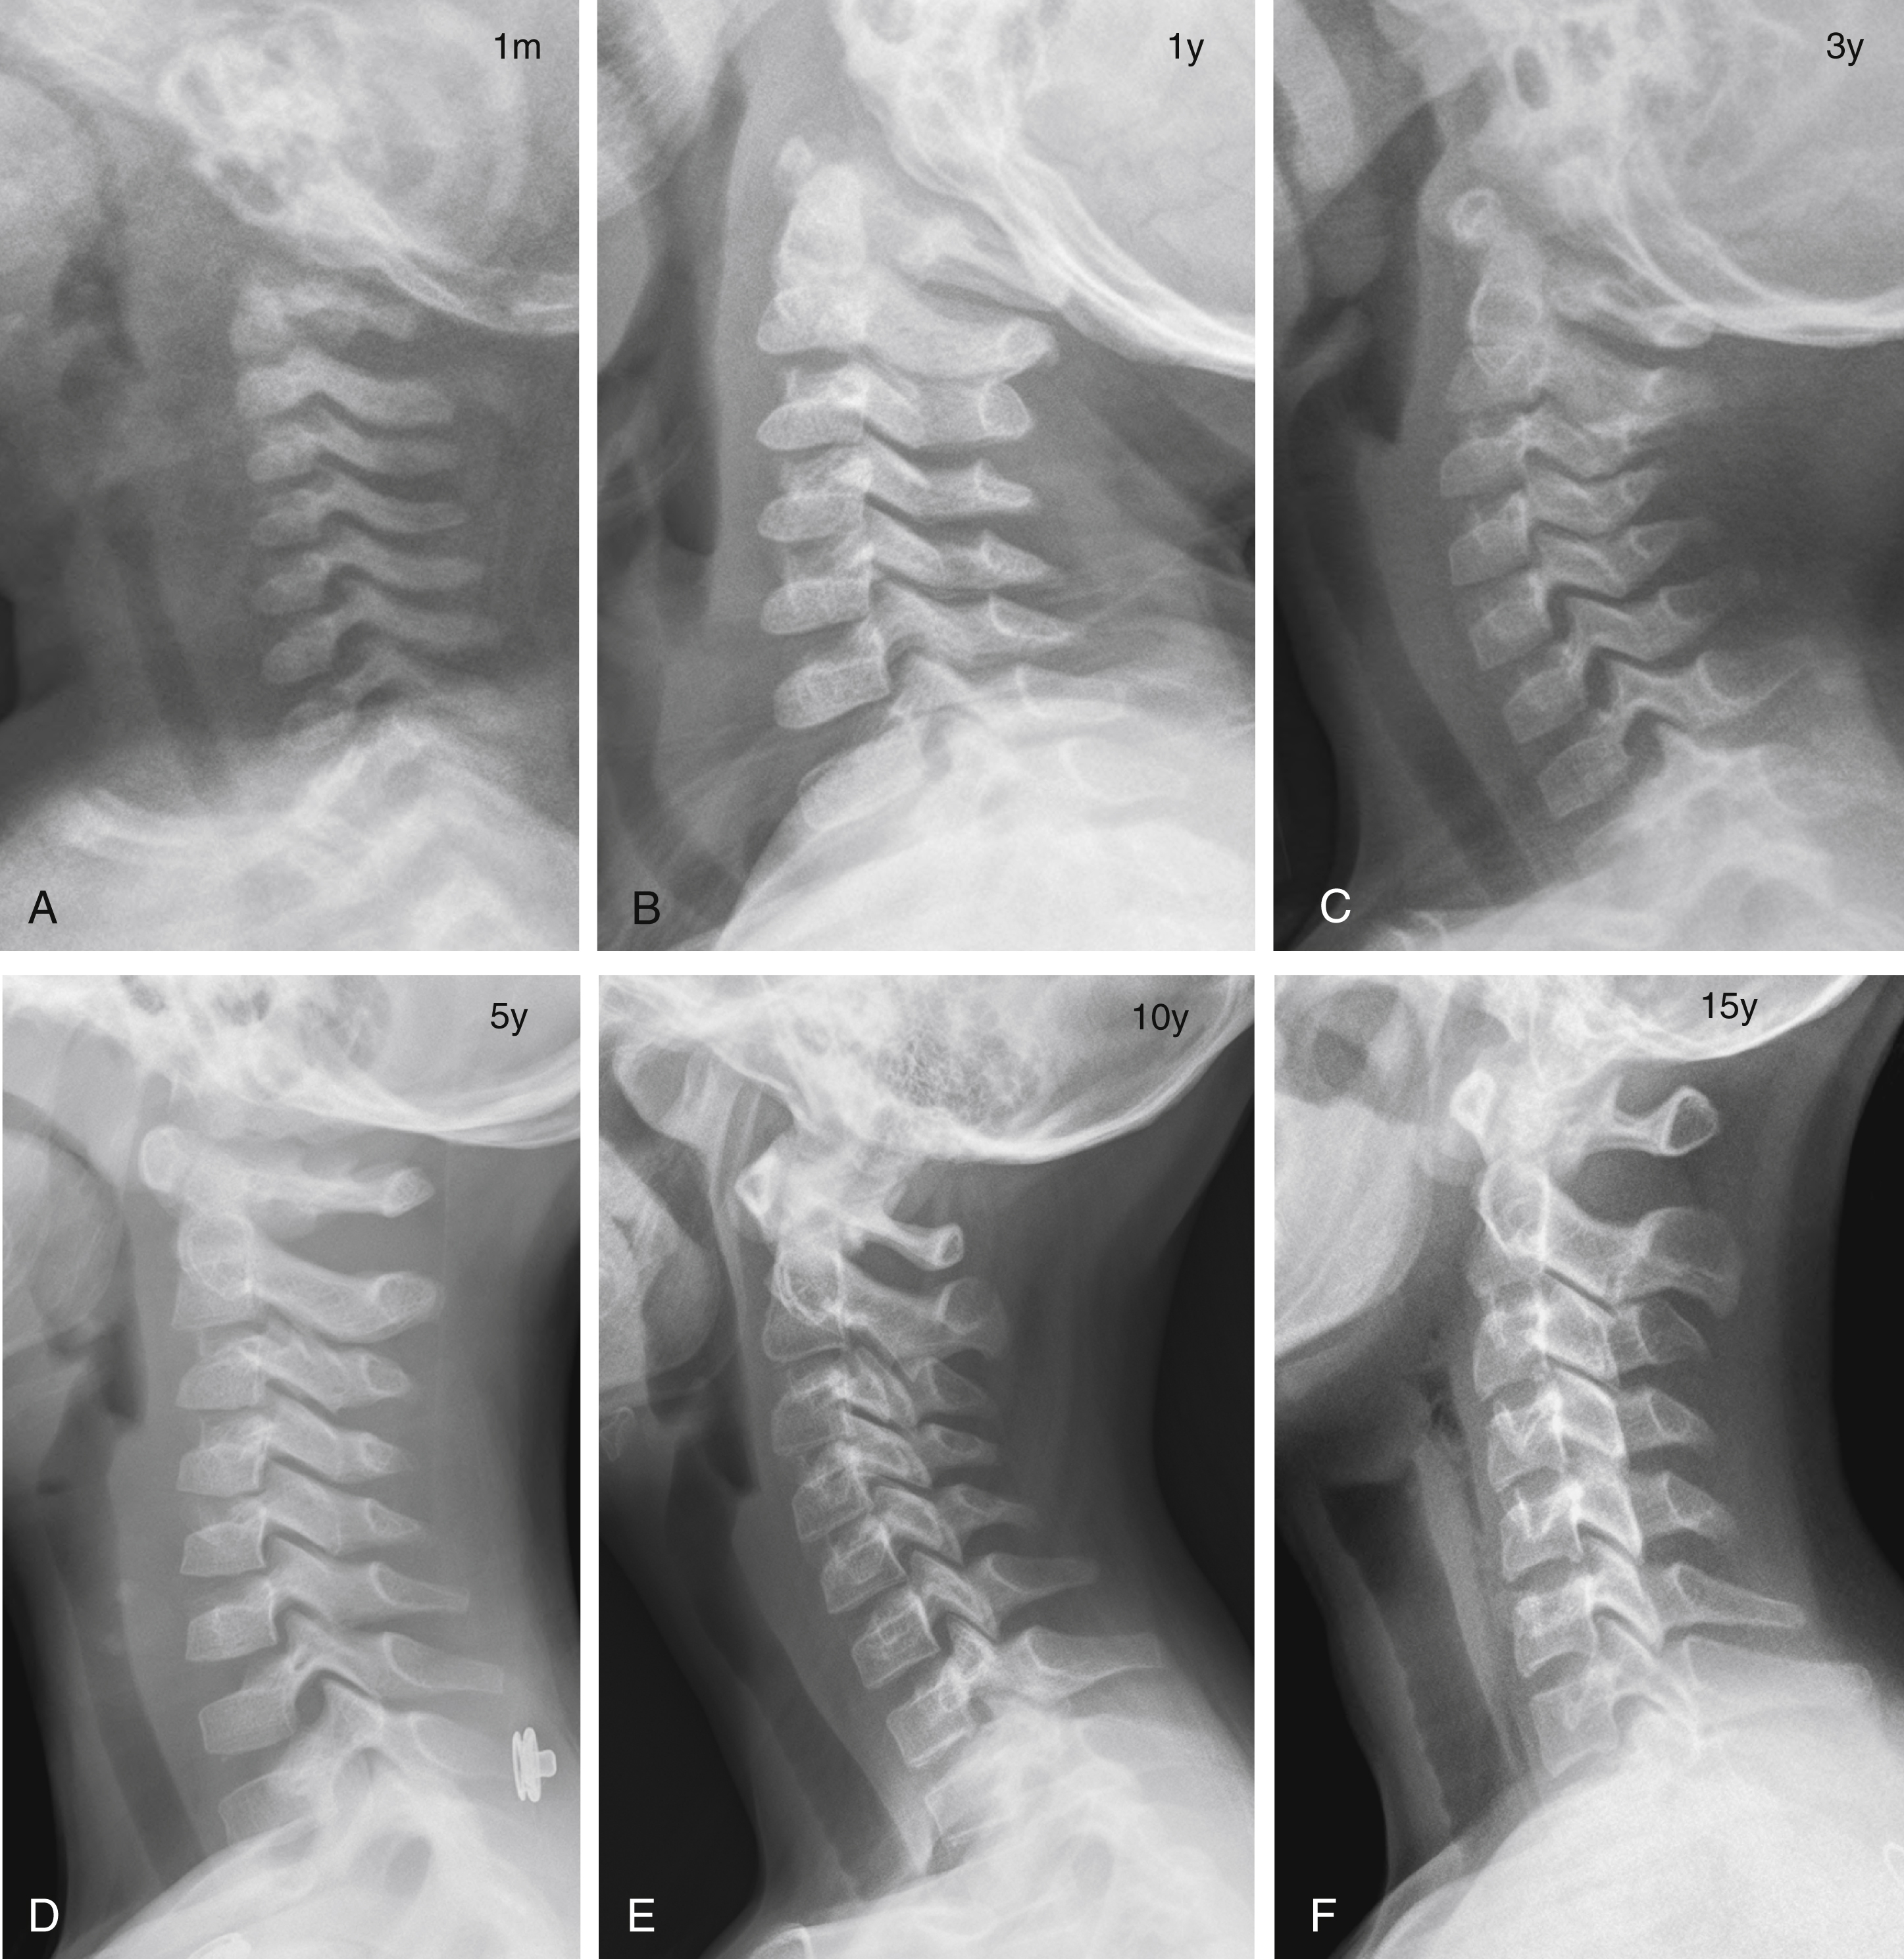 Fig. 28.1, Lateral radiographs of the cervical spine at (A) 1 month, (B) 1 year, (C) 3 years, (D) 5 years, (E) 10 years, and (F) 15 years of age. Vertebral body shape changes from oval shape in infancy, mild anterior wedge shape in the young child, and rectangular or square shape in the older child and adolescent. In the young child (A–C), there is uncovered appearance of the facets, overriding C1 on C2, and underdeveloped, upward orientation of the spinous processes. m , months; y , years.